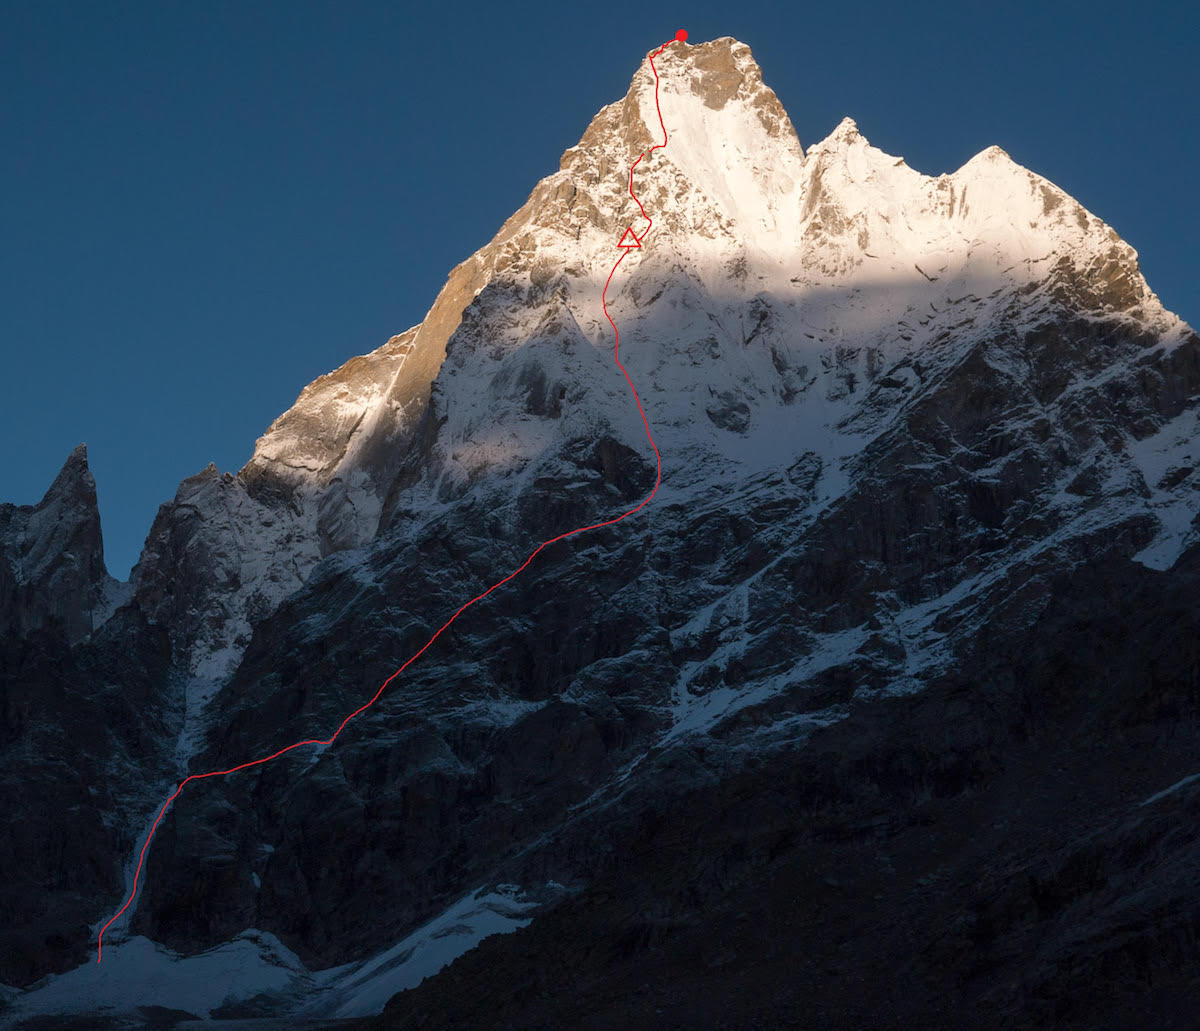 The northeast face of Cerro Kishtwar (6173m) with All Izz Well (VI WI5 M6, 1500m) marked in red with the team's first bivy site. [Photo] Genki Narumi, Yusuke Sato and Hiroki Yamamoto collection